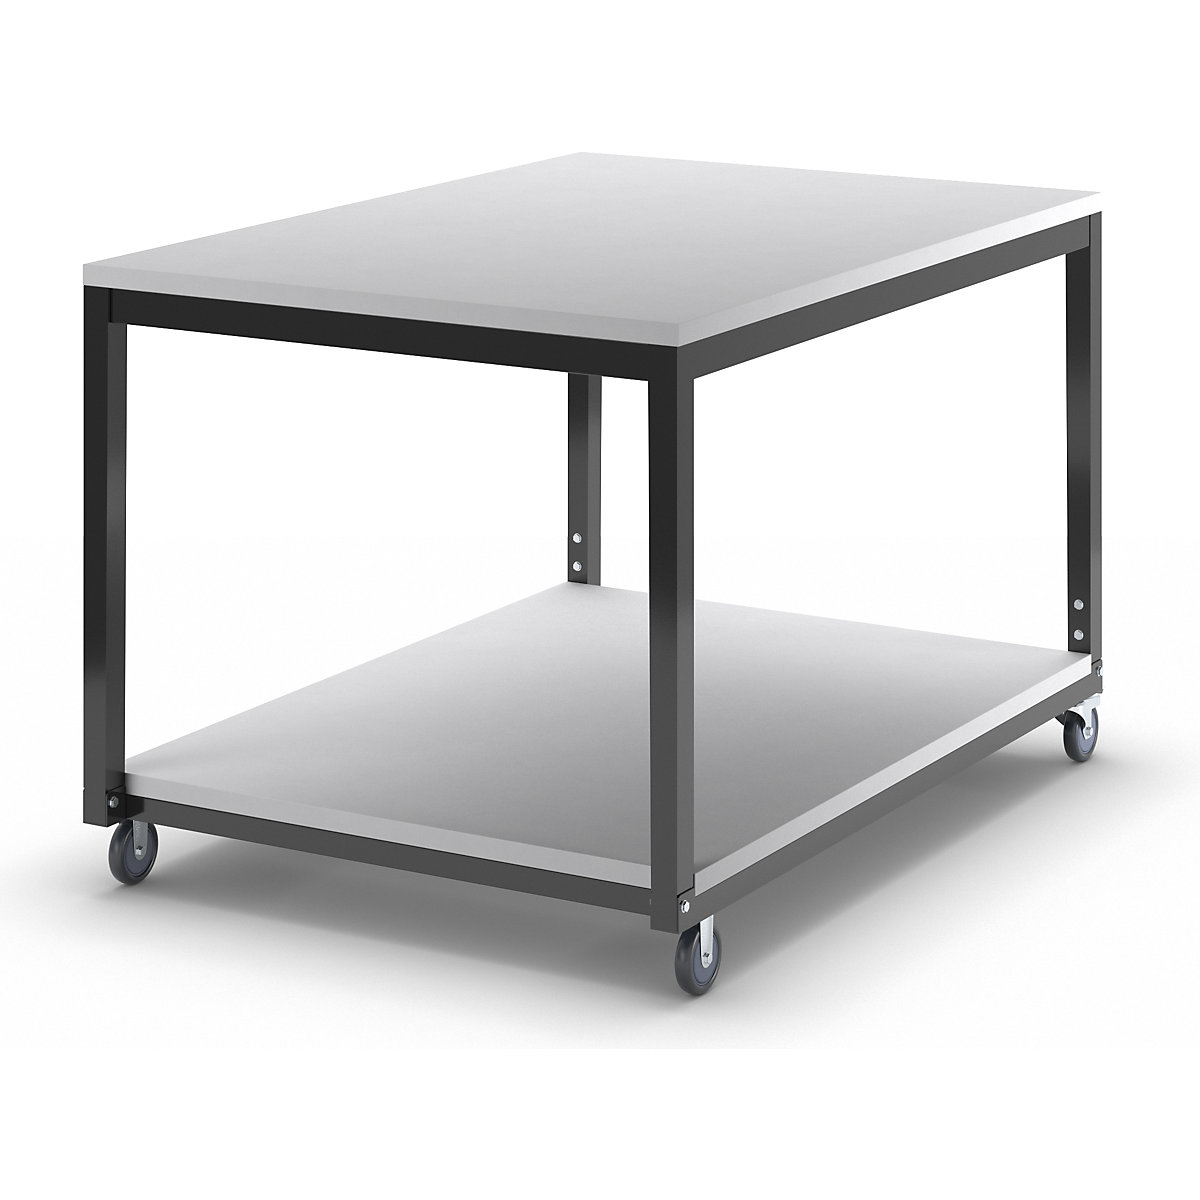 Table trolley with 2 shelves, height adjustable – eurokraft basic, for WT worktable system, LxW 1000 x 700 mm-1